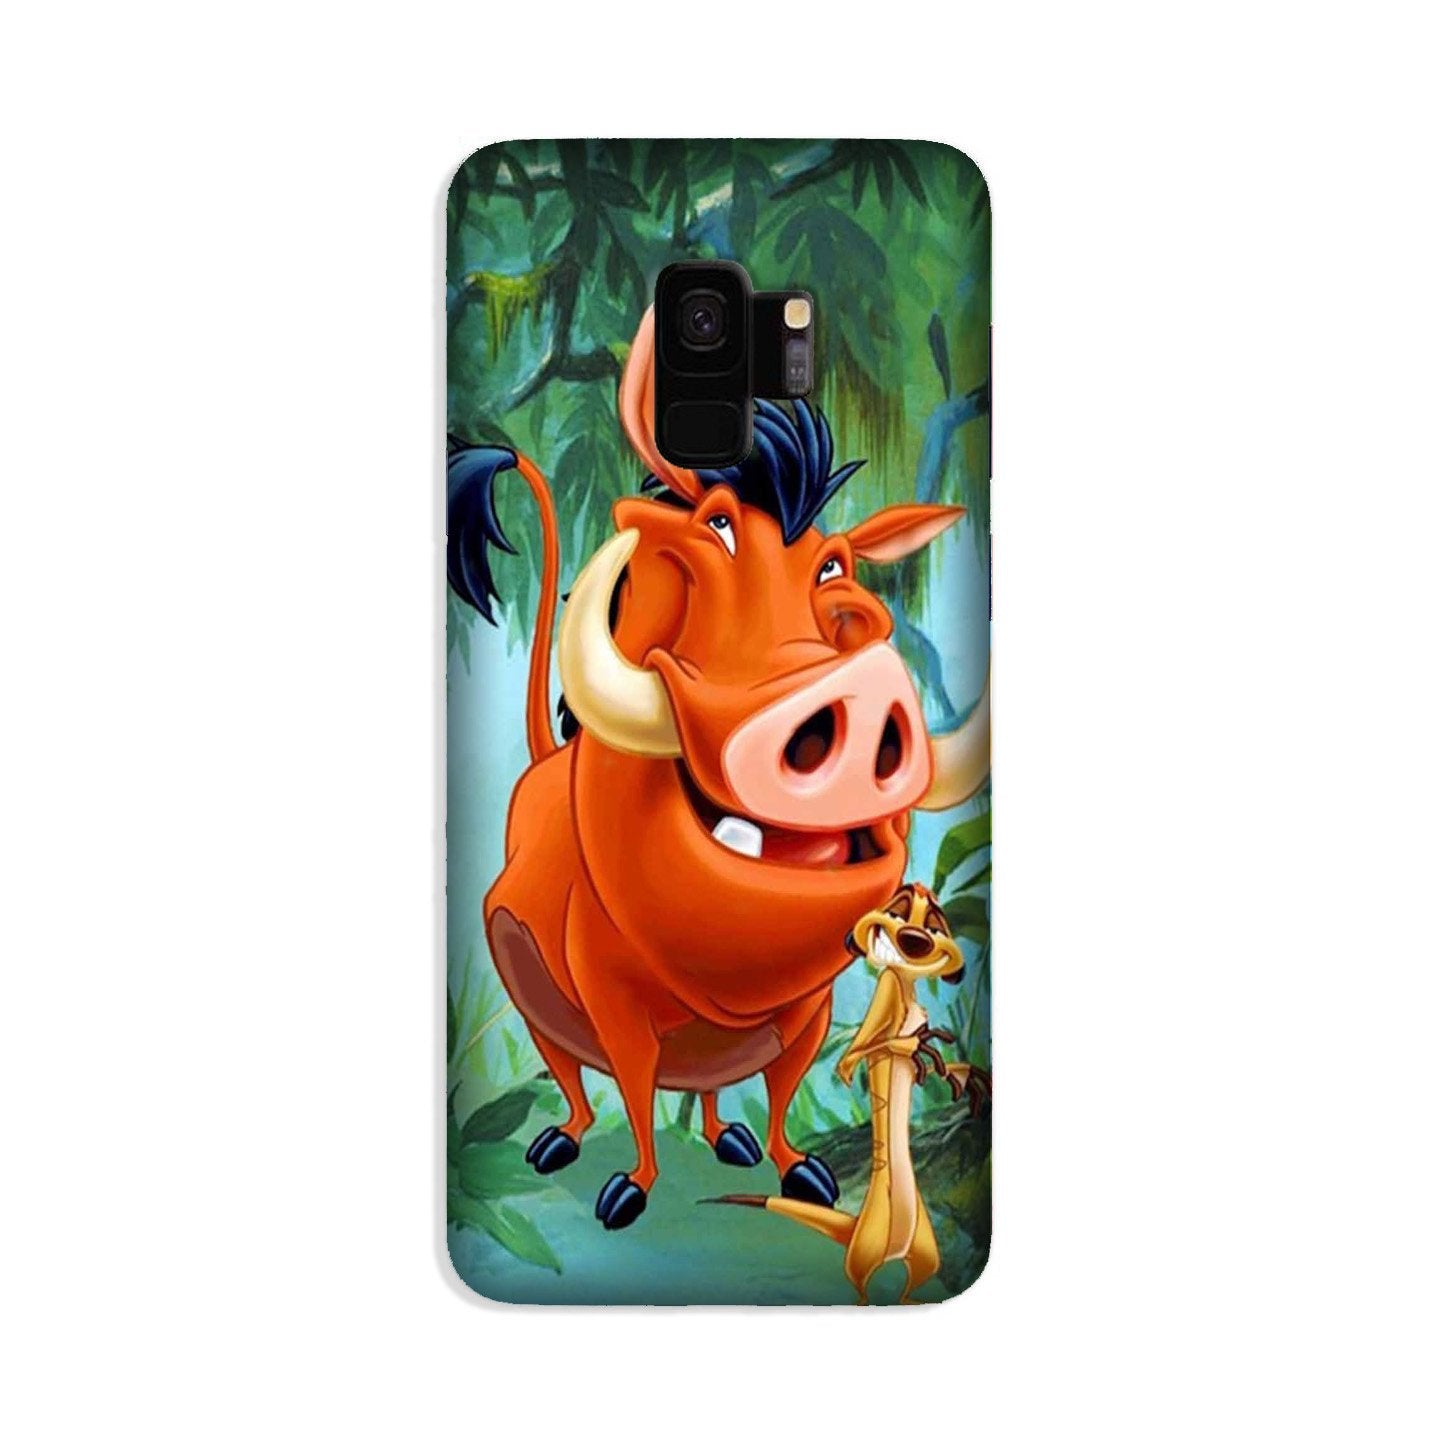 Timon and Pumbaa Mobile Back Case for Galaxy S9  (Design - 305)